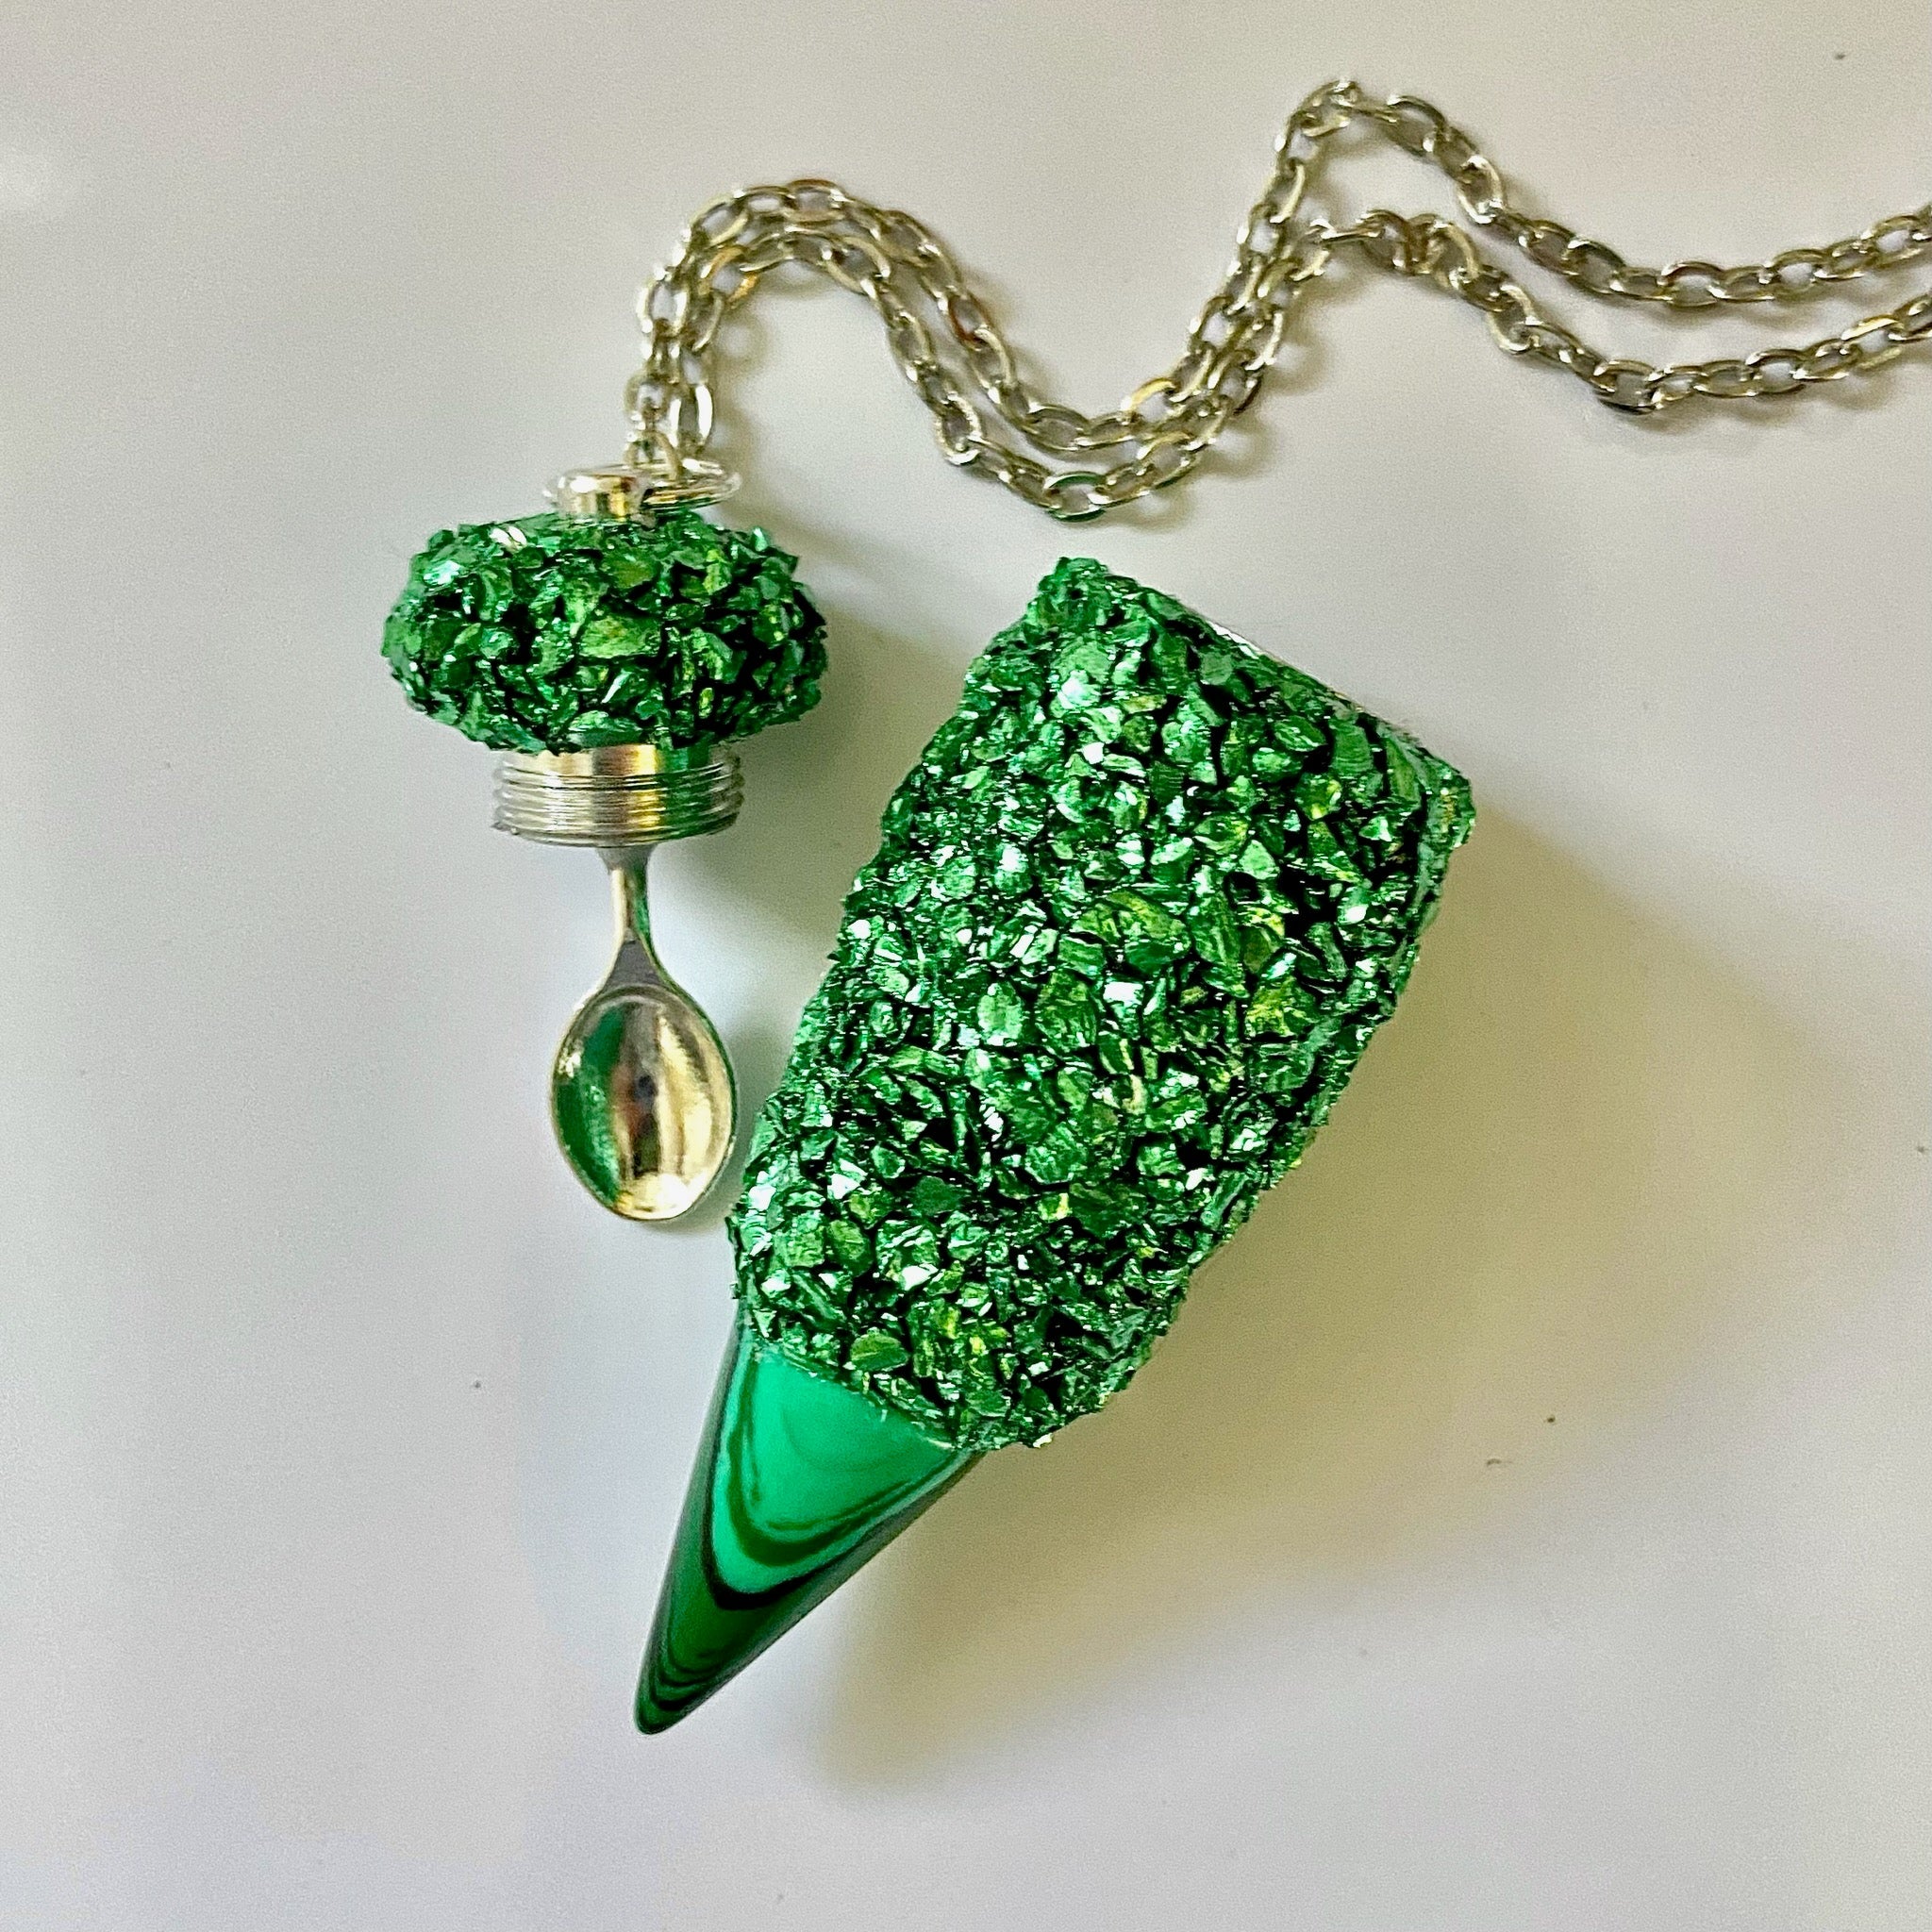 Green Stash Necklace with Spoon As Pictured / Spoon Detachable from Chain / Medium Scoop (Extendable)